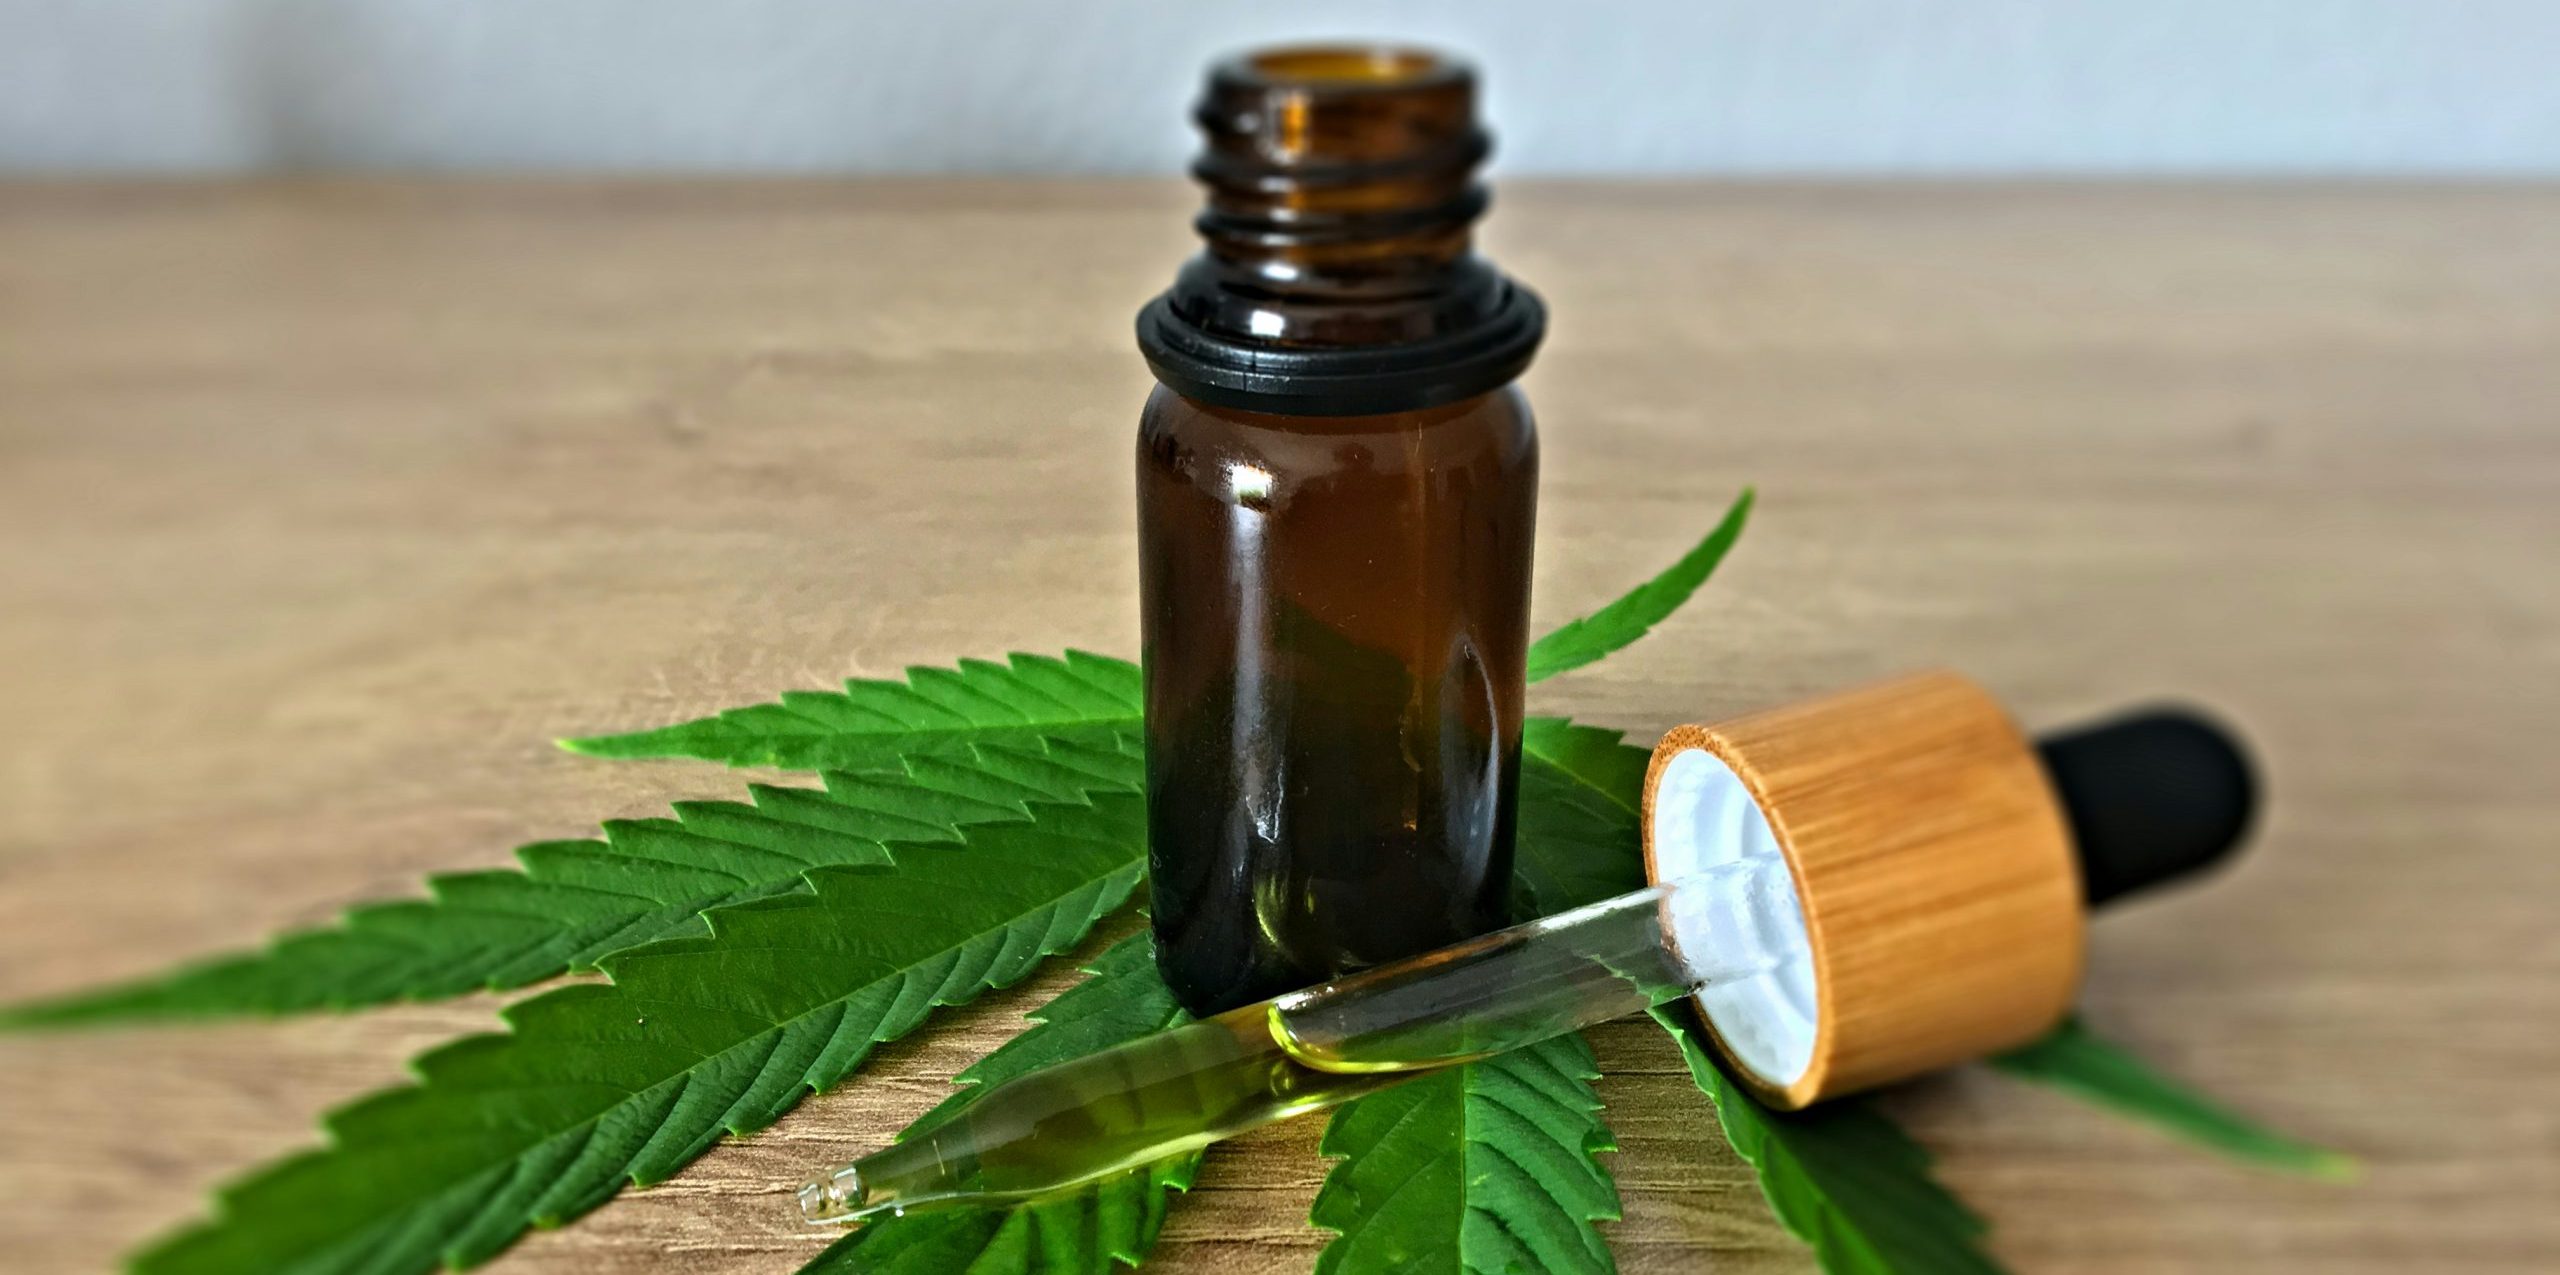 What medicinal cannabis products are available in Australia?